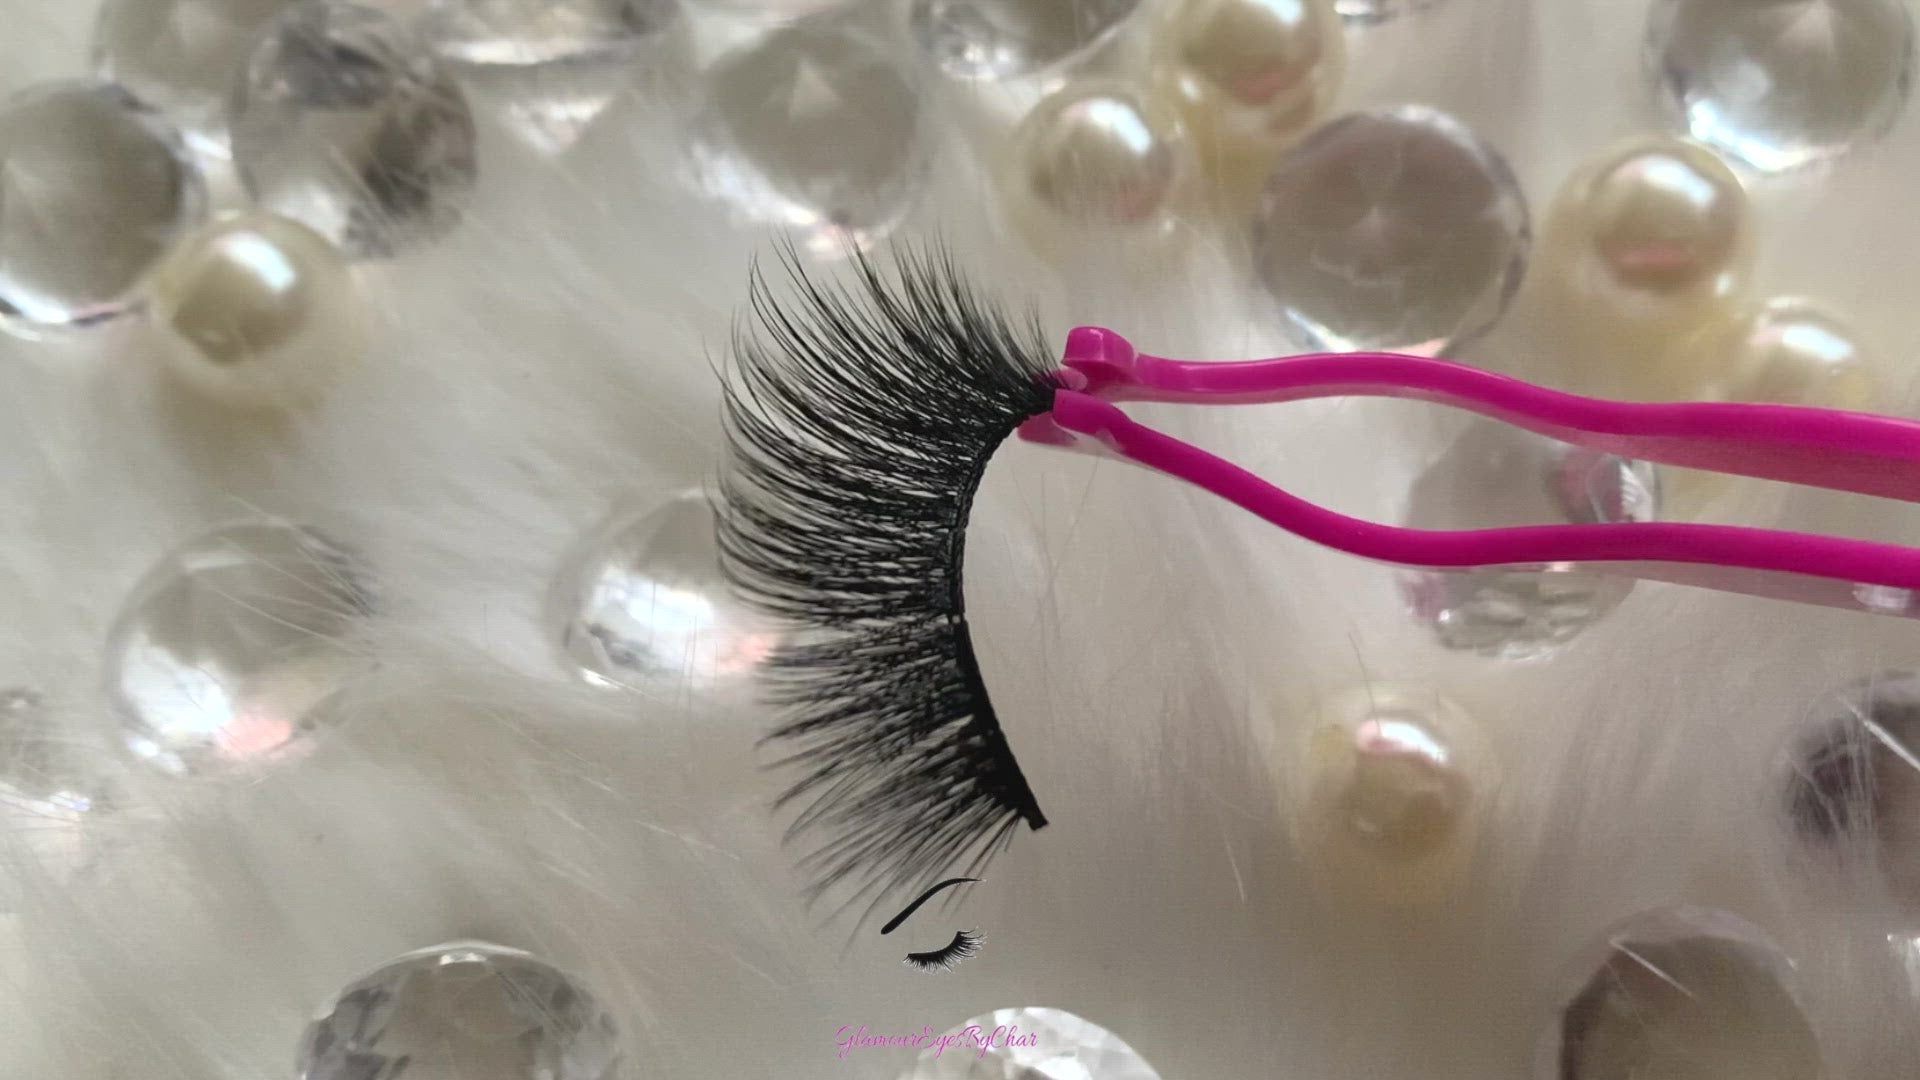 These 3D luxurious faux mink lashes are called Sweetheart and are 10-12mm in length. They are lightweight and very comfortable to wear on the lids. The thin lashband, makes the application process a breeze. Sweetheart are suitable for everyday wear and can be worn up to 25 times if handled with care.  Tip: Apply our mink lashes with our eyelash adhesive and using luxurious rose gold or gold tweezers. The application process will be made quick and easy.'